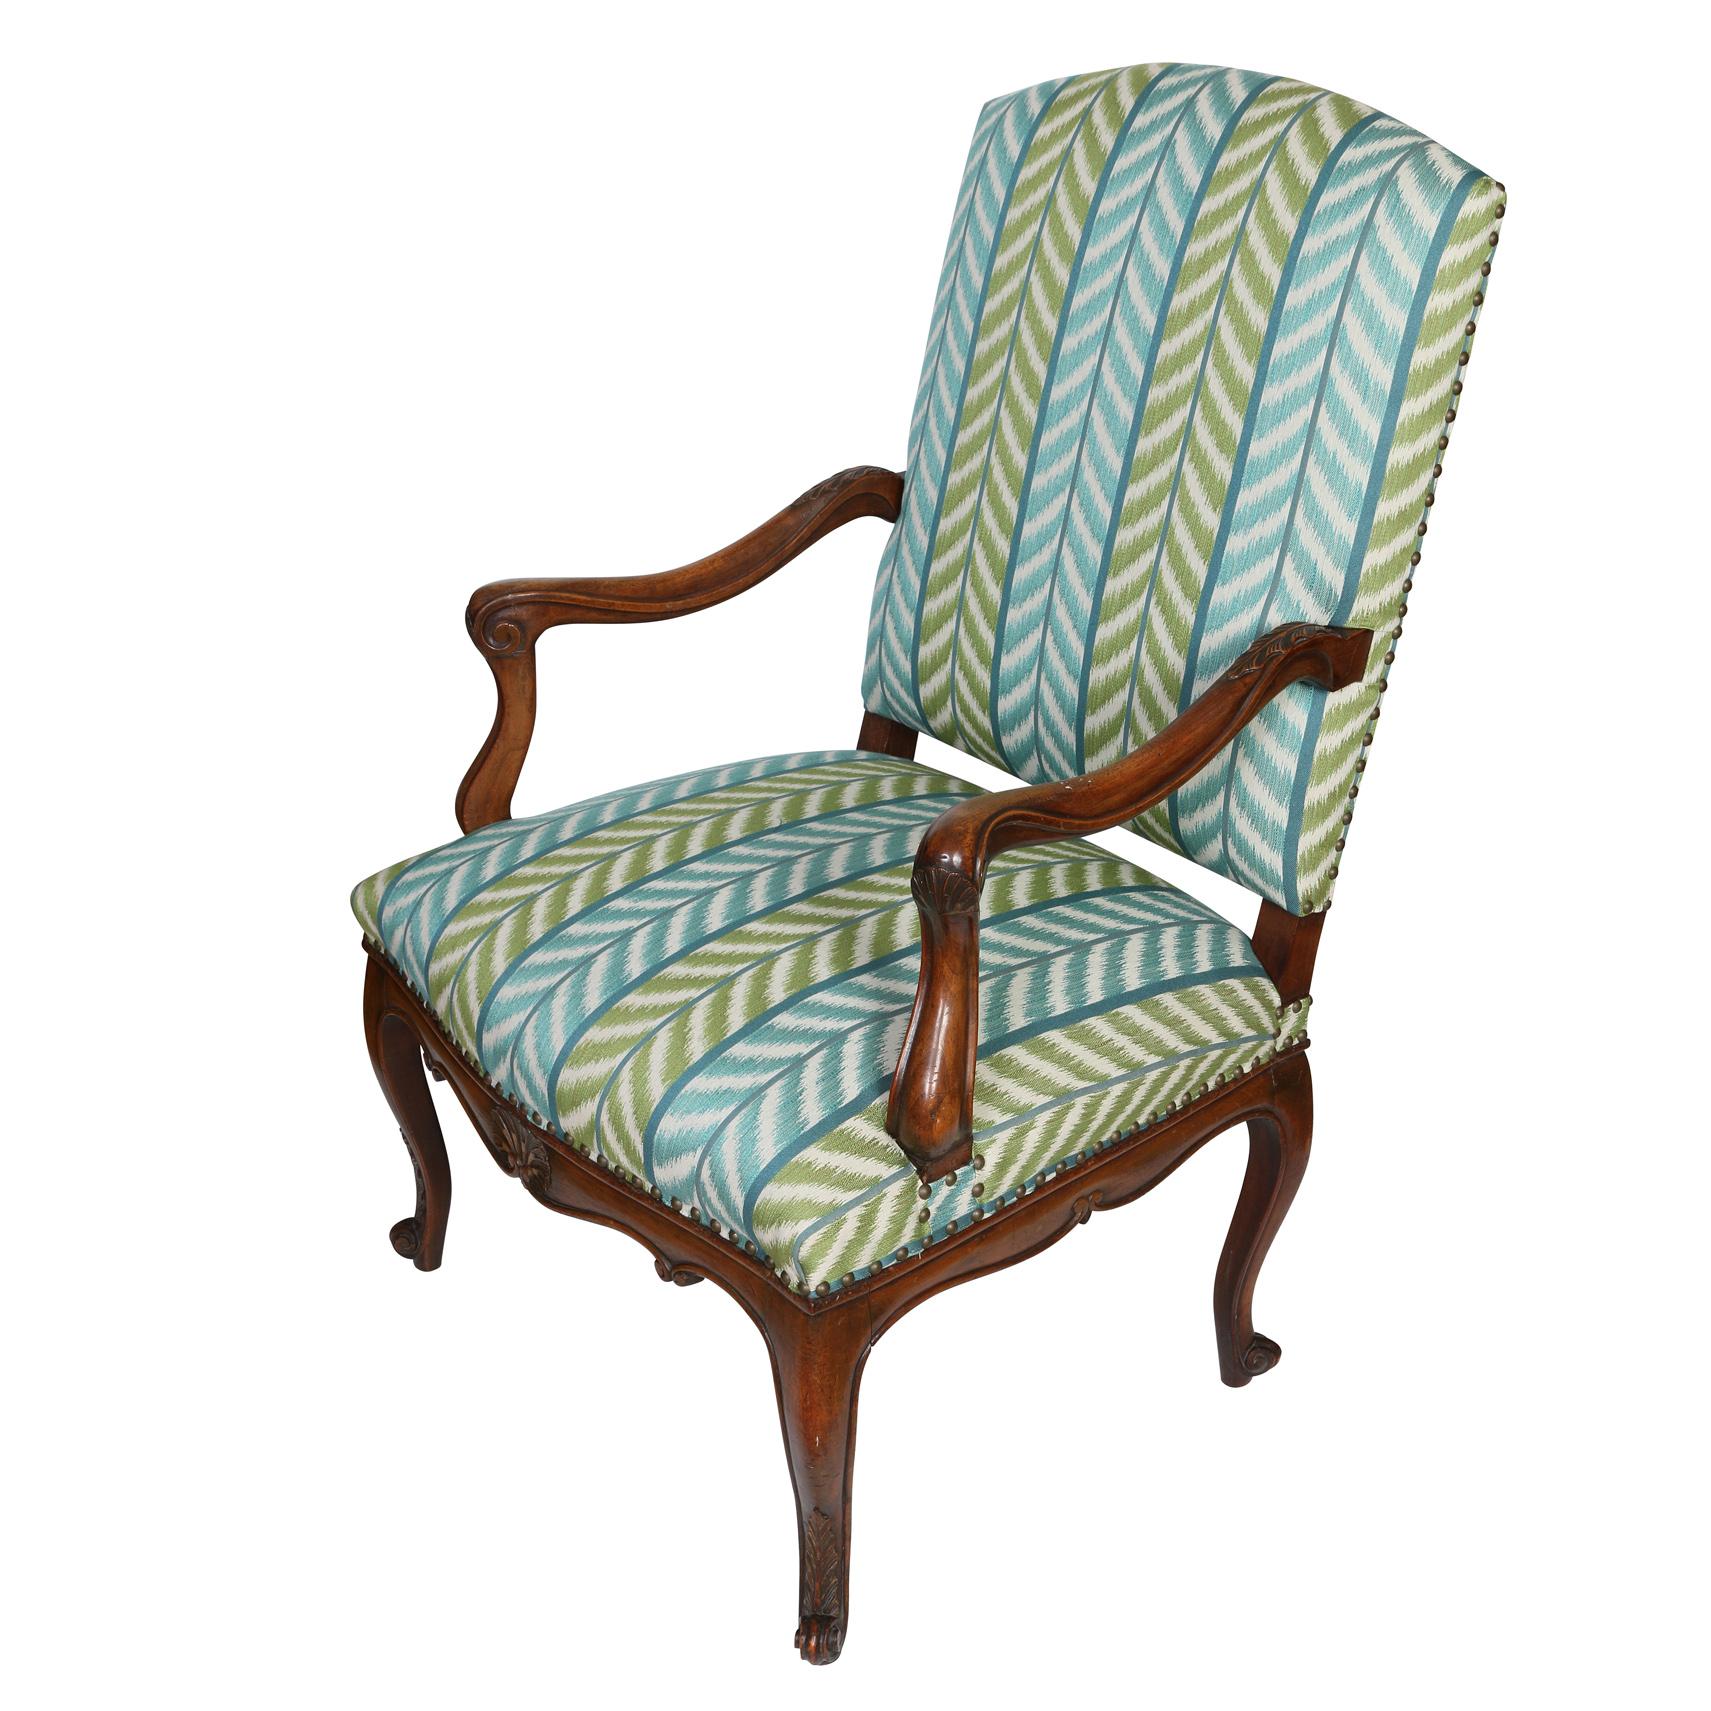 Pair of Walnut Regence Chairs With Quadrille Blue and Green Chevron Upholstery In Good Condition For Sale In Locust Valley, NY